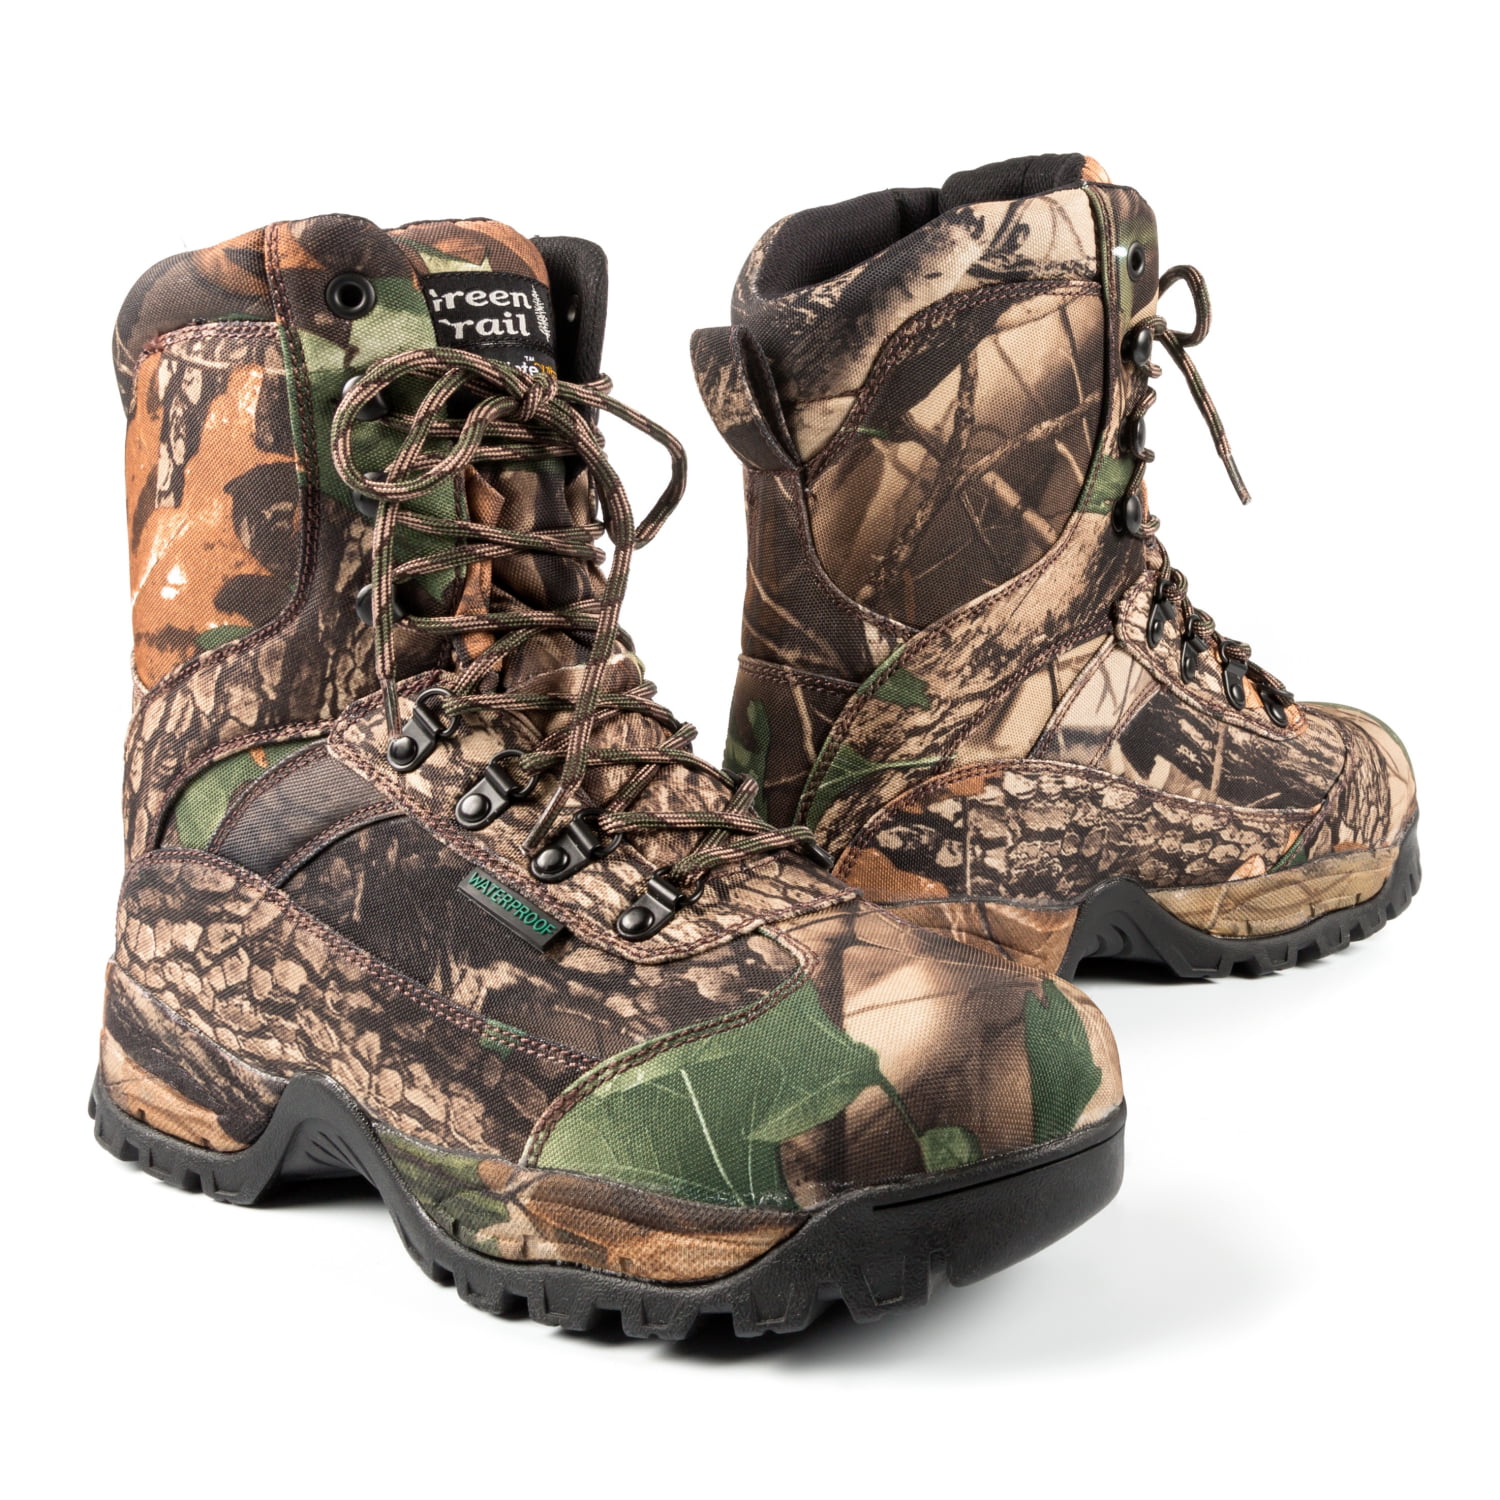 Outdoors Fishing Hunting Boots Wellingtons With Warm Lining Filstar YX-107 